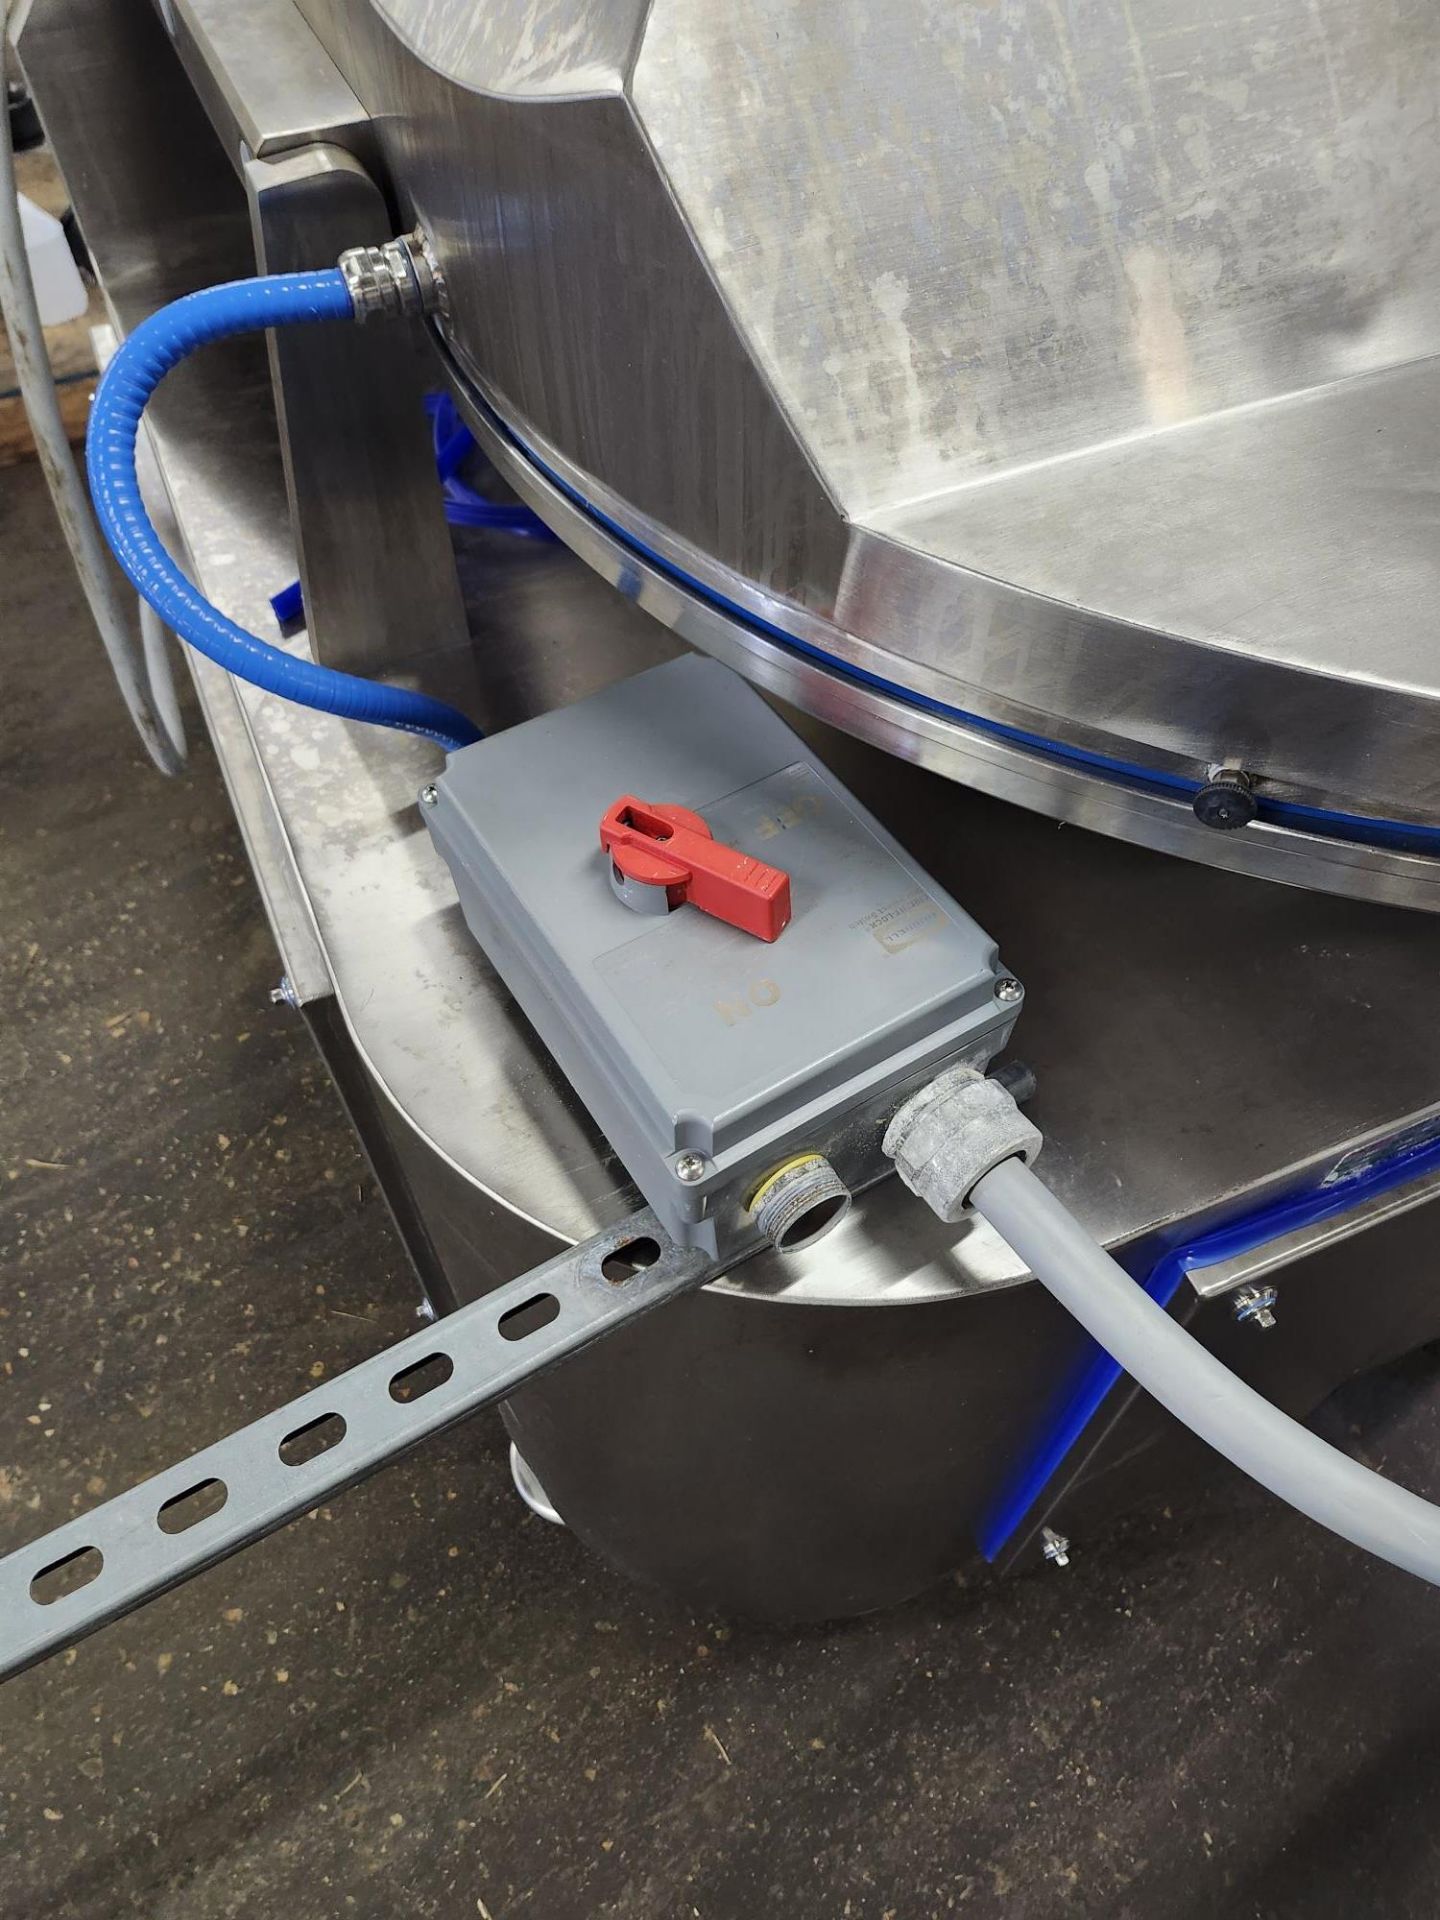 Talsa Mdl. K120 Bowl Chopper, 220 volts, 3 phase, 60 hz (Located in Sandwich, IL) - Image 10 of 10